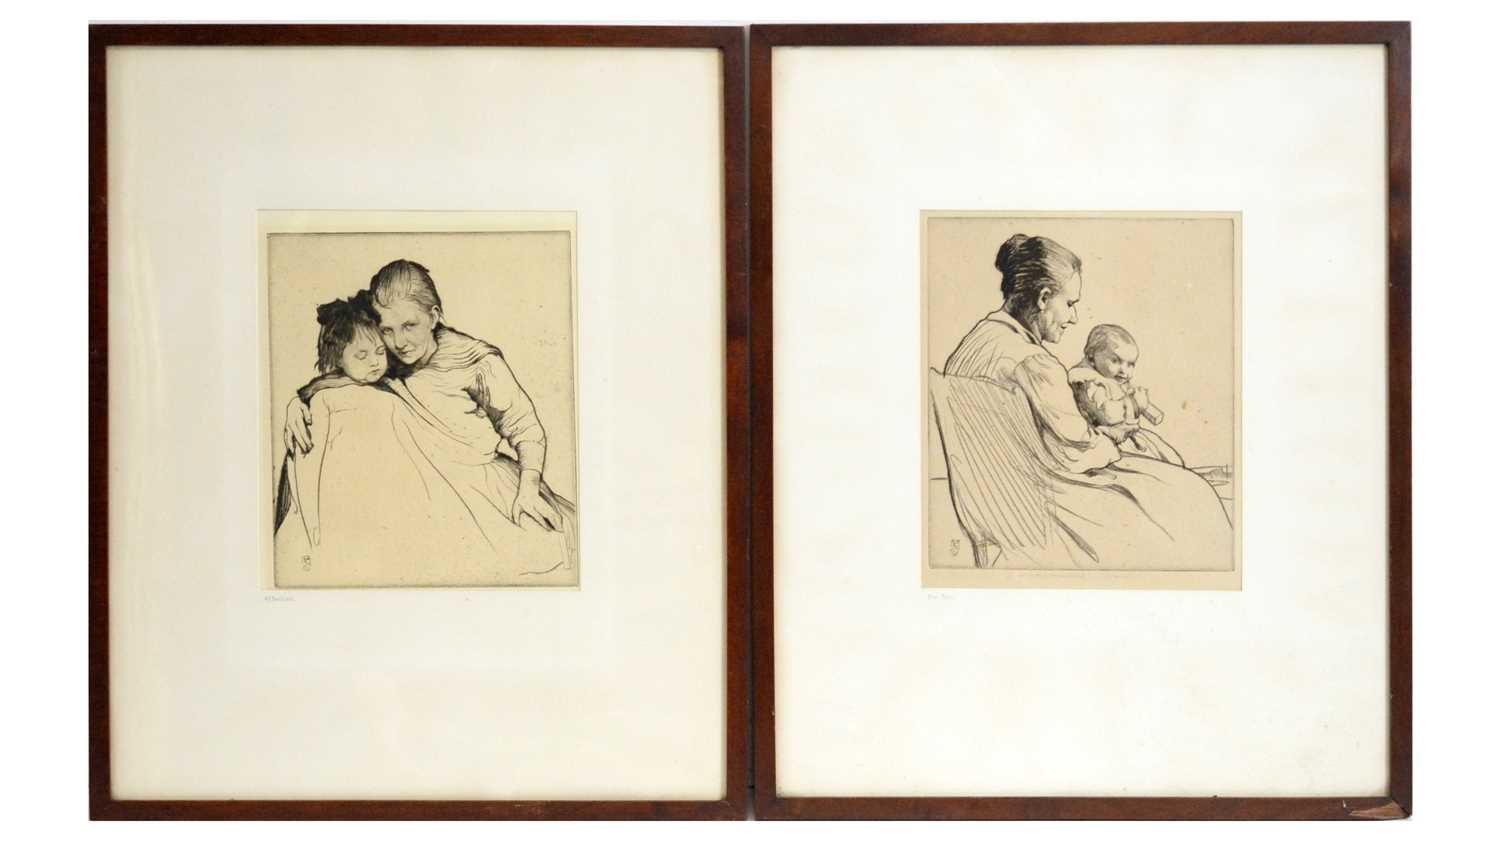 William Lee Hankey - The Toy, and Affection | etchings